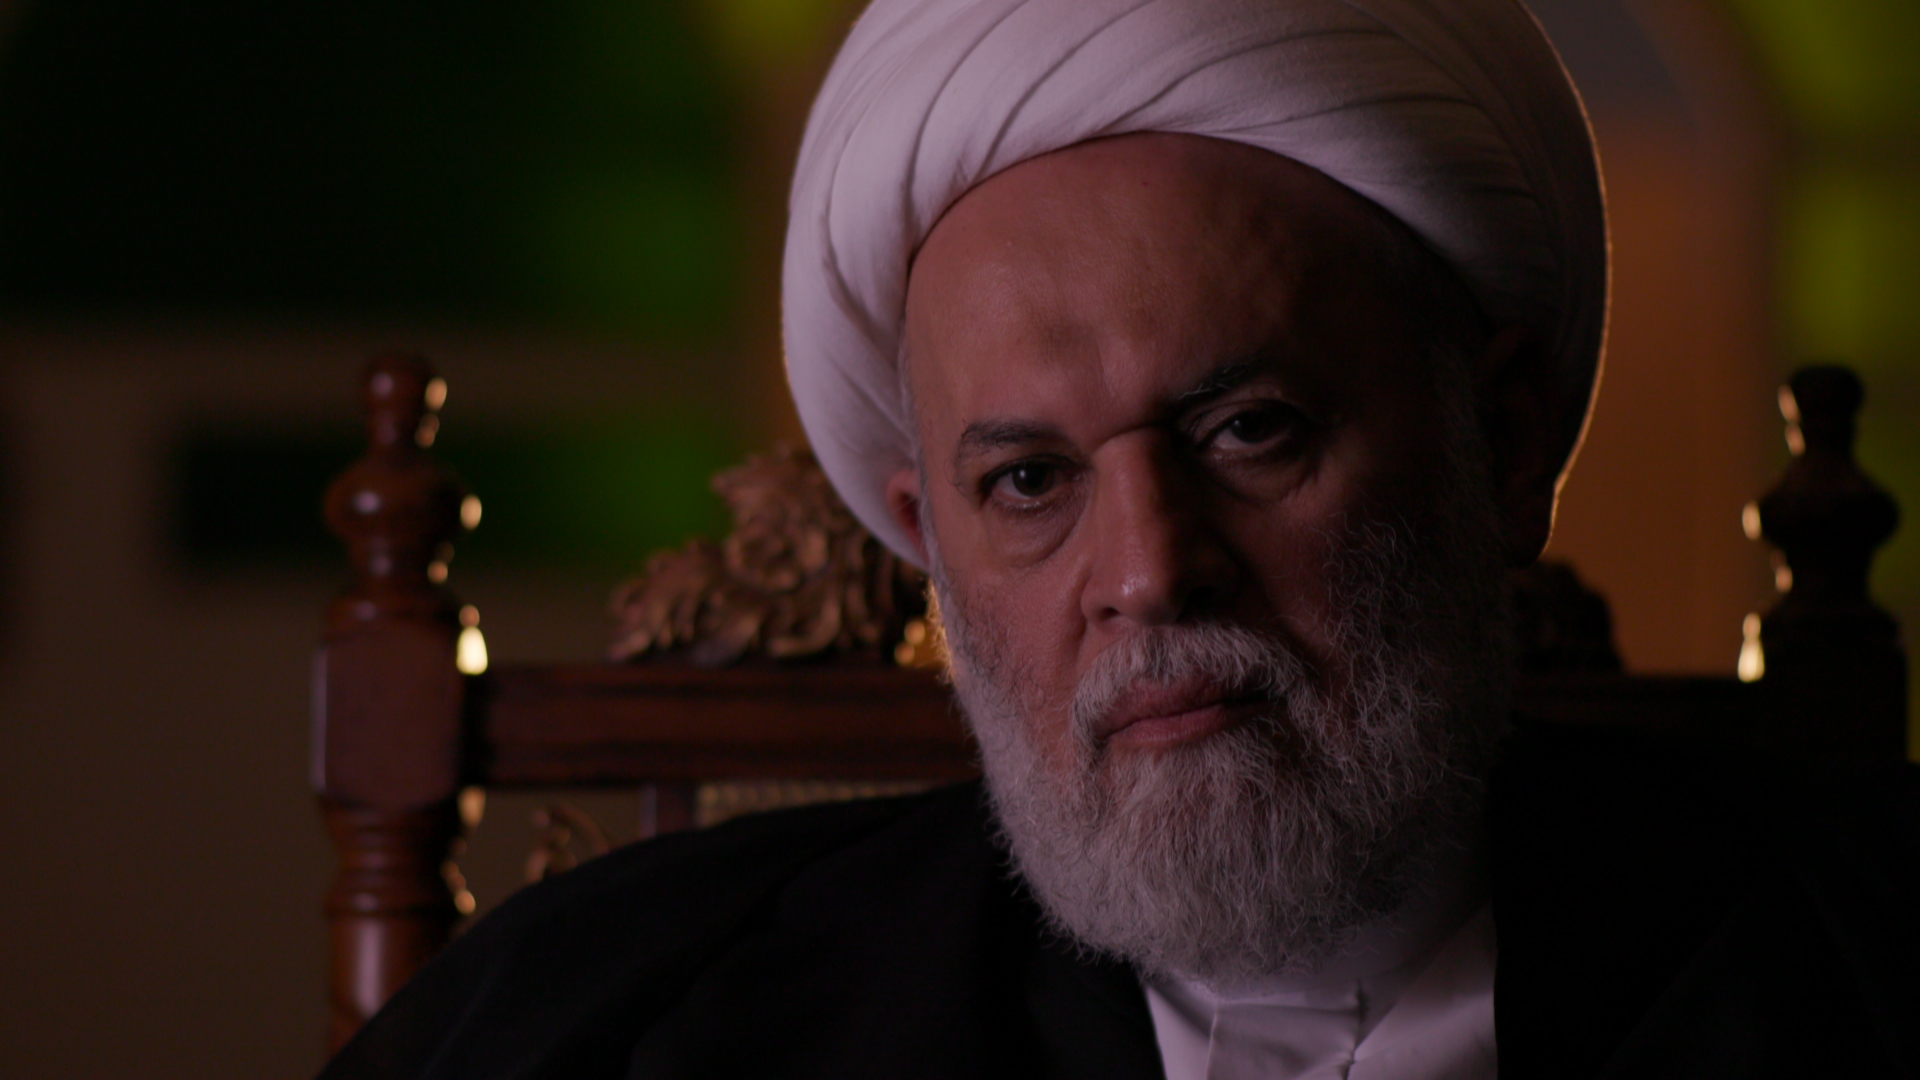 Sheikh Jalal al-Saghir, who has known Soleimani for many years, called him 'a rare treasure' (BBC Two)